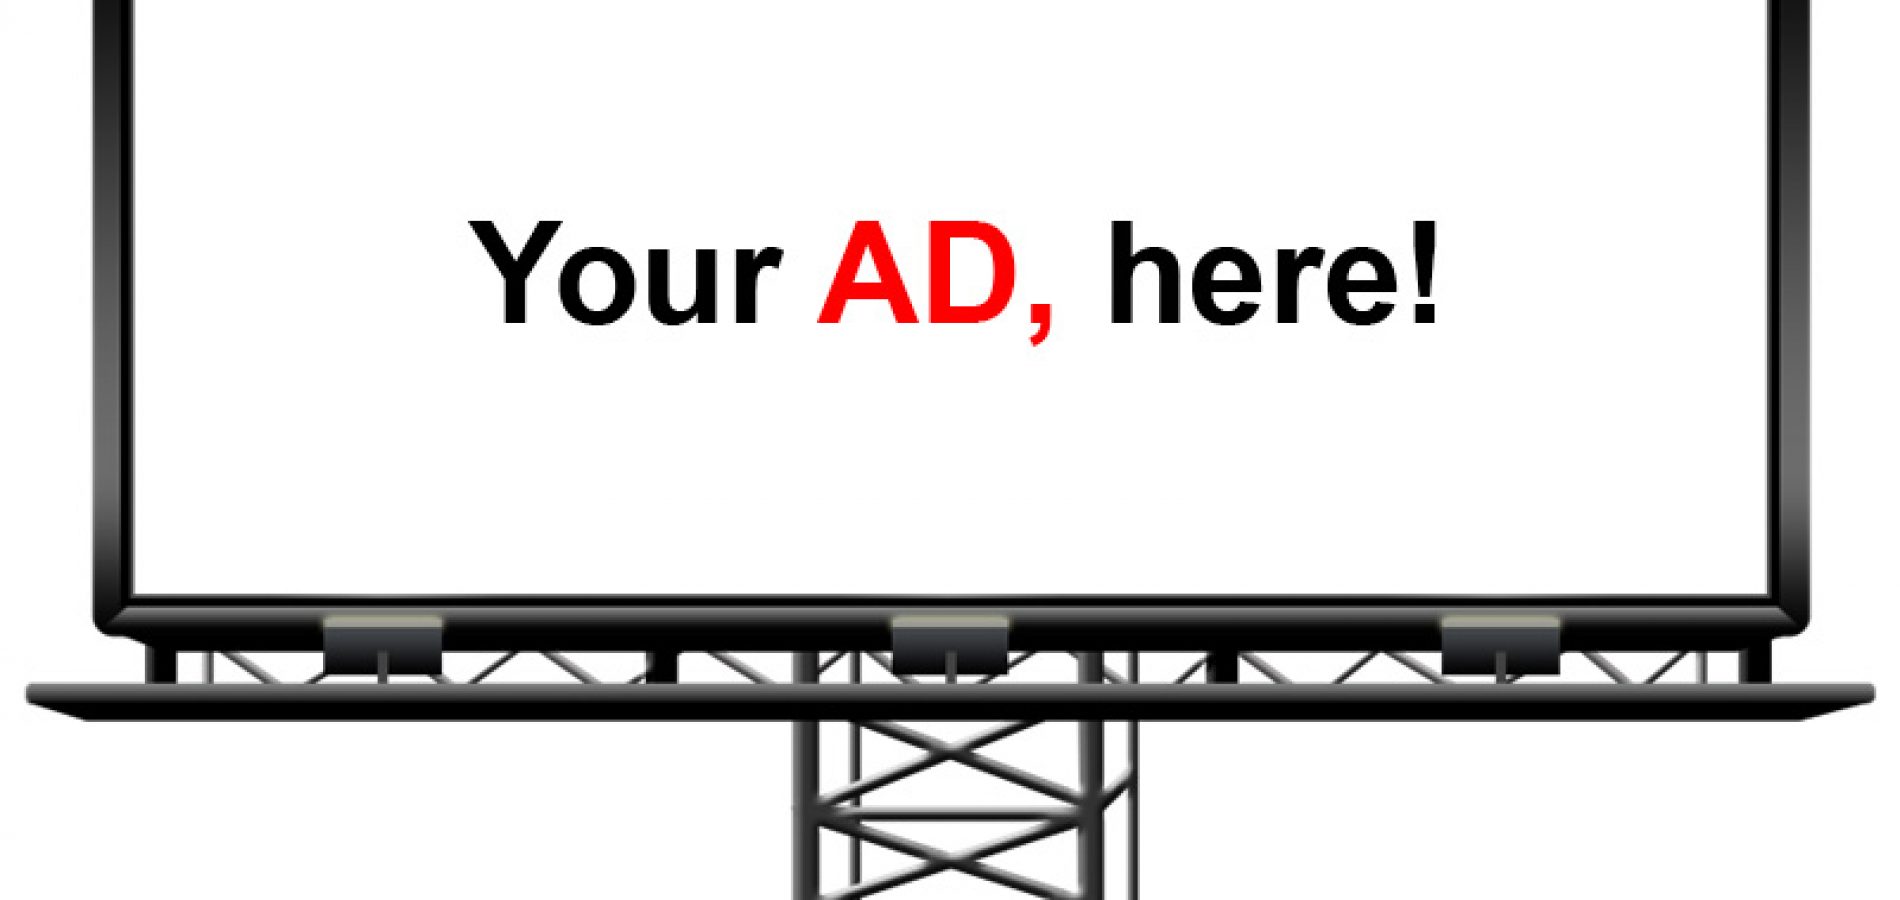 Have you got anything to advertise?